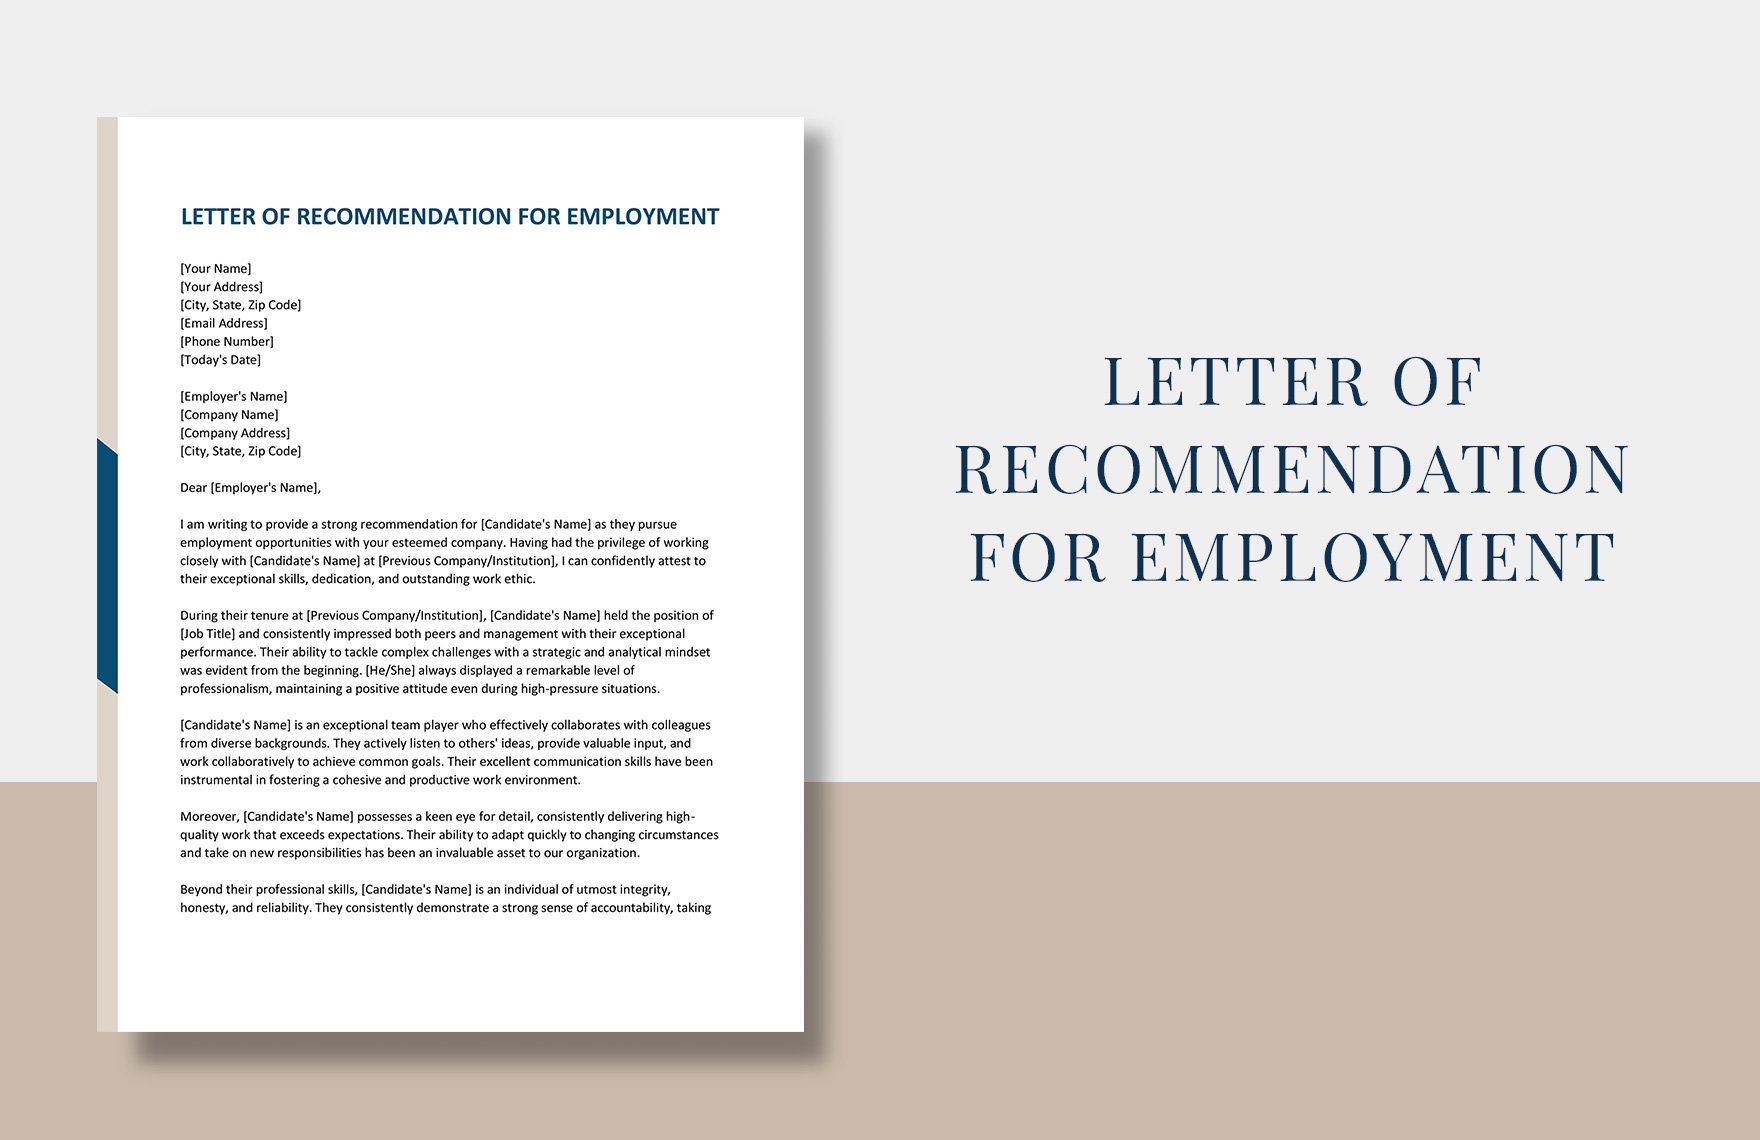 Free Letter of Recommendation for Employment